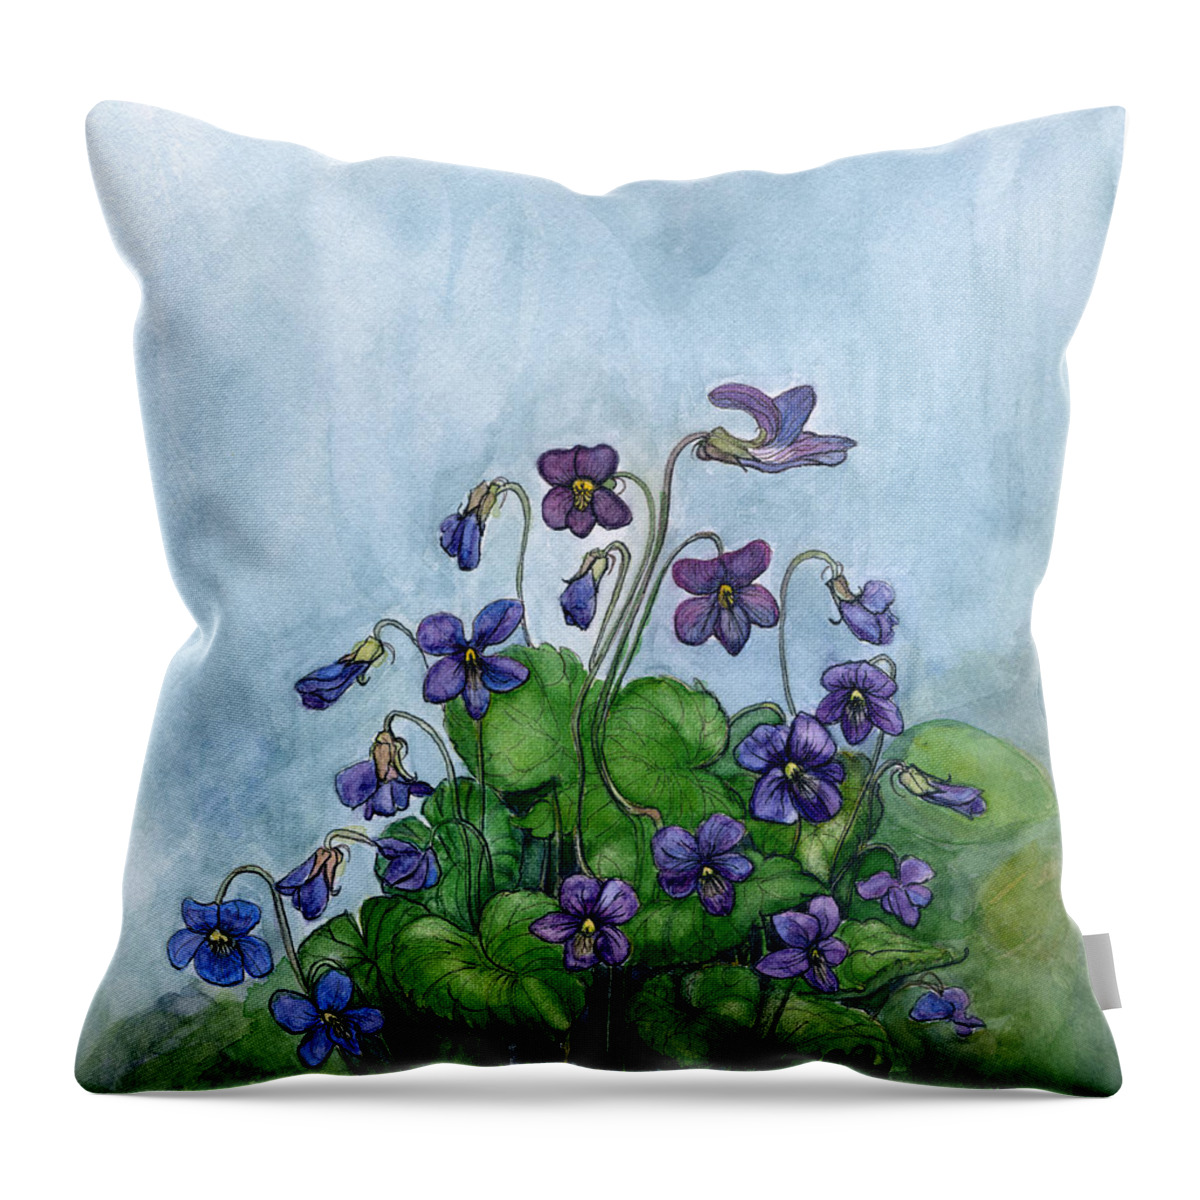 Wood Violets Throw Pillow featuring the painting Wood Violets by Katherine Miller